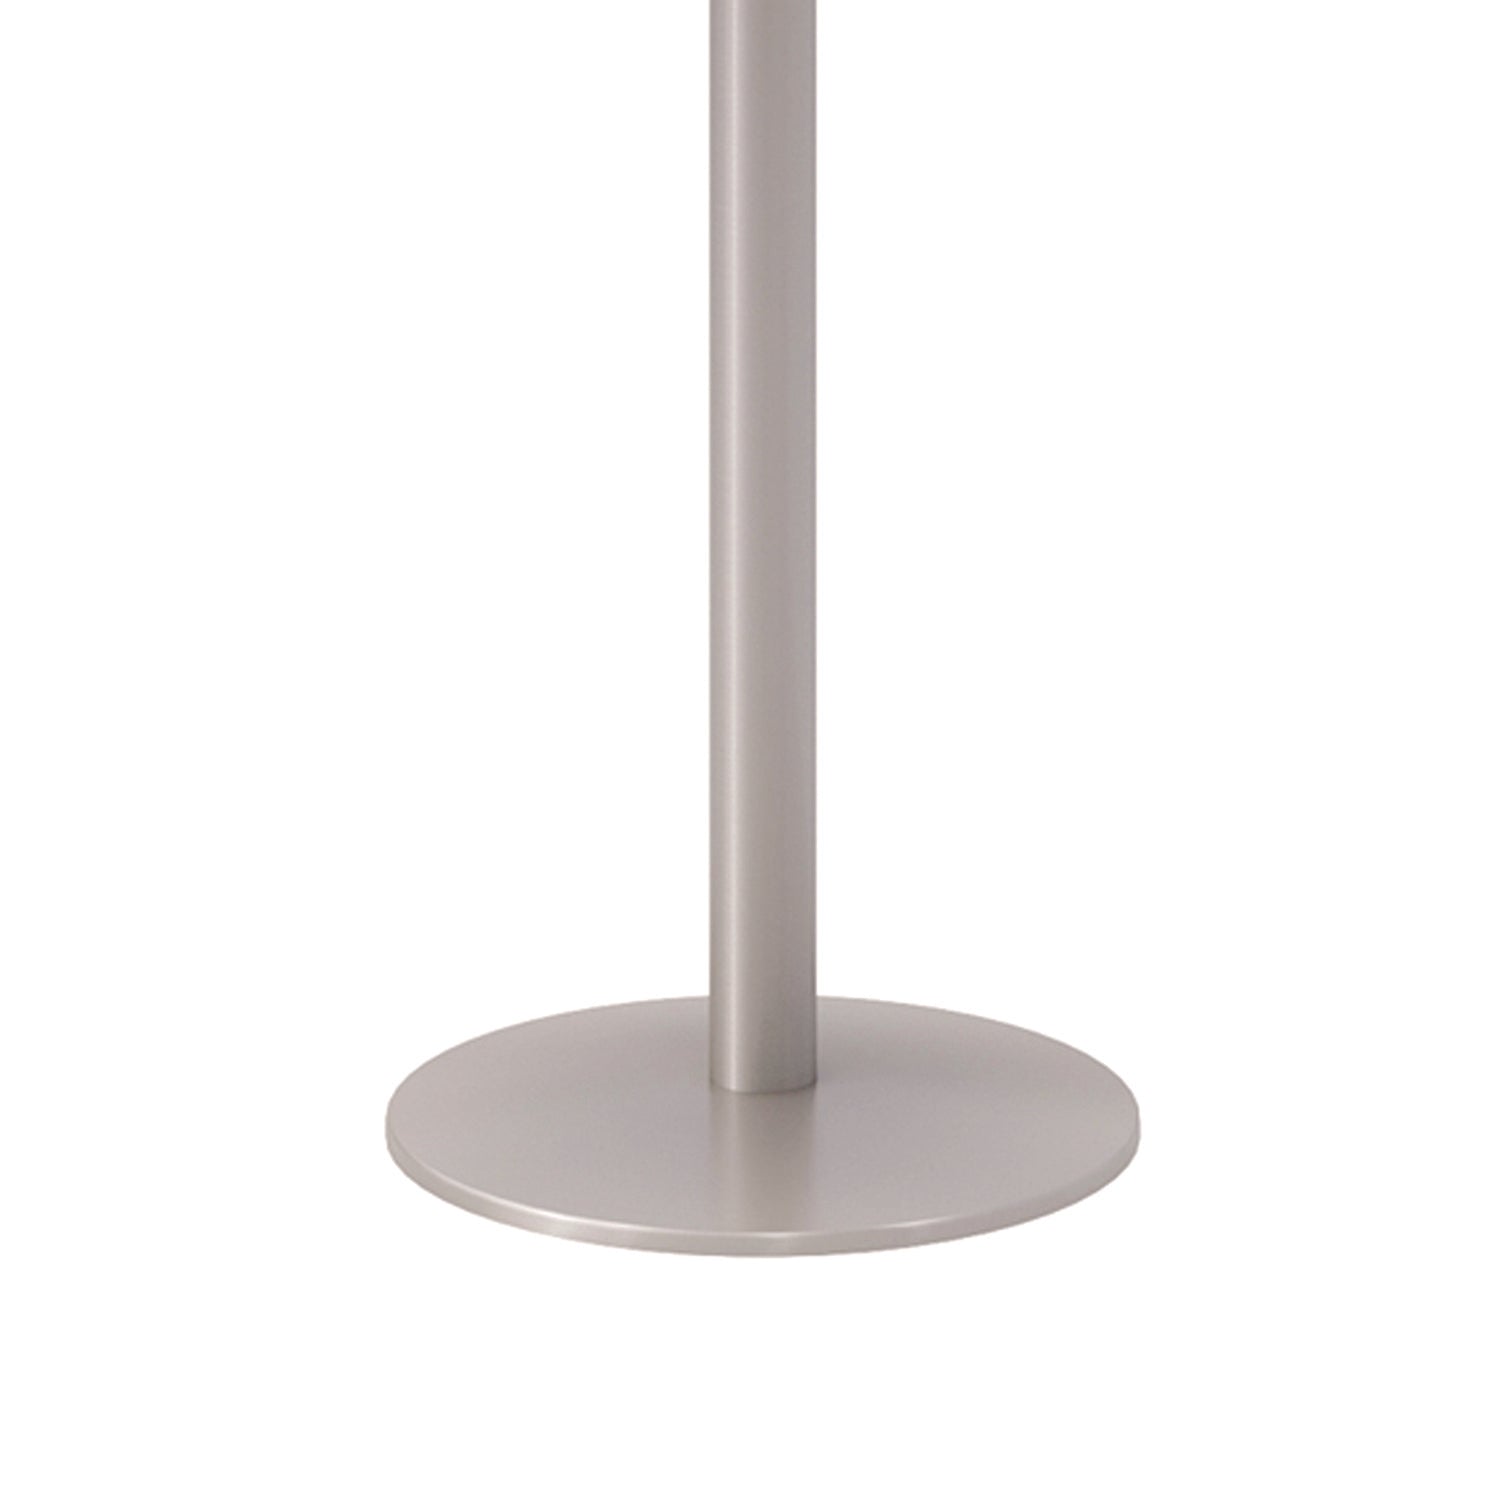 pedestal-bistro-table-with-four-yellow-kool-series-barstools-round-36dia-x-41h-designer-white-ships-in-4-6-business-days_kfi811774037099 - 3